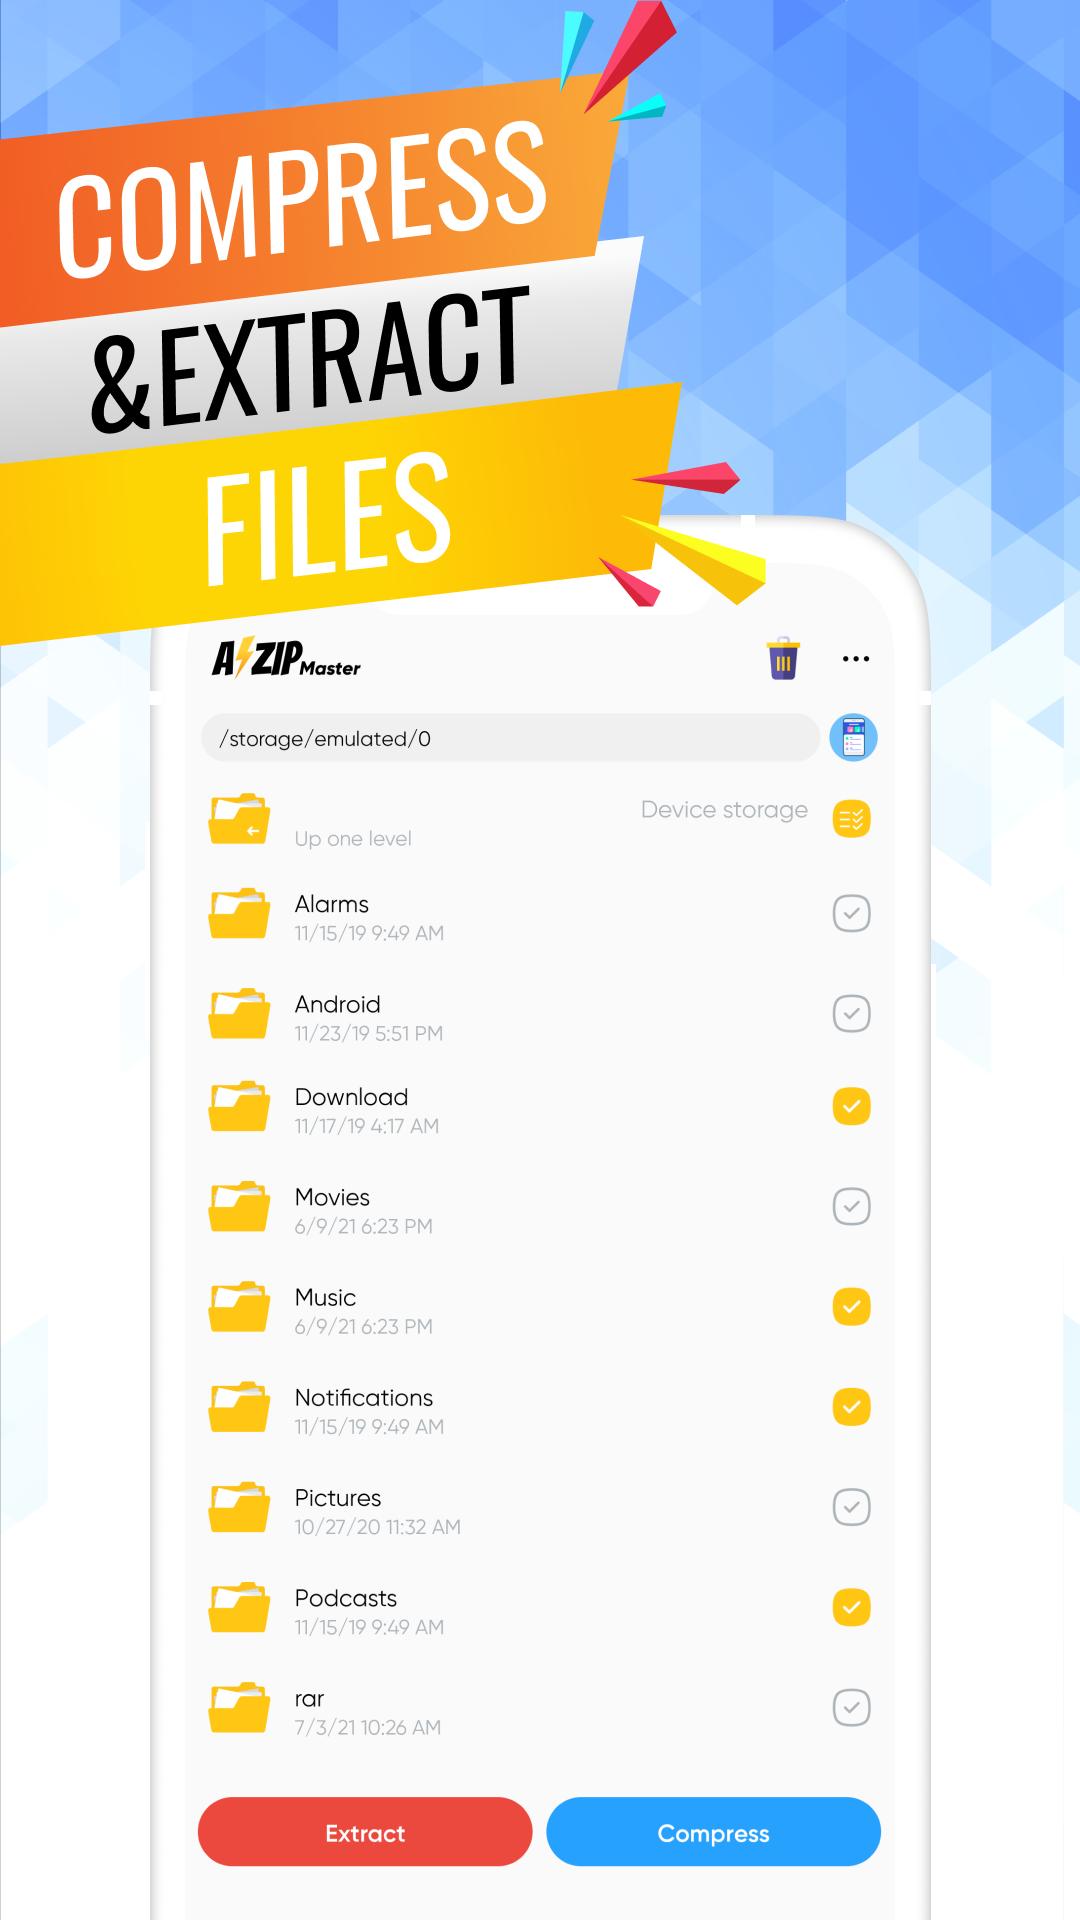 AZİPS. Android FS_Master.zip. Zip masters